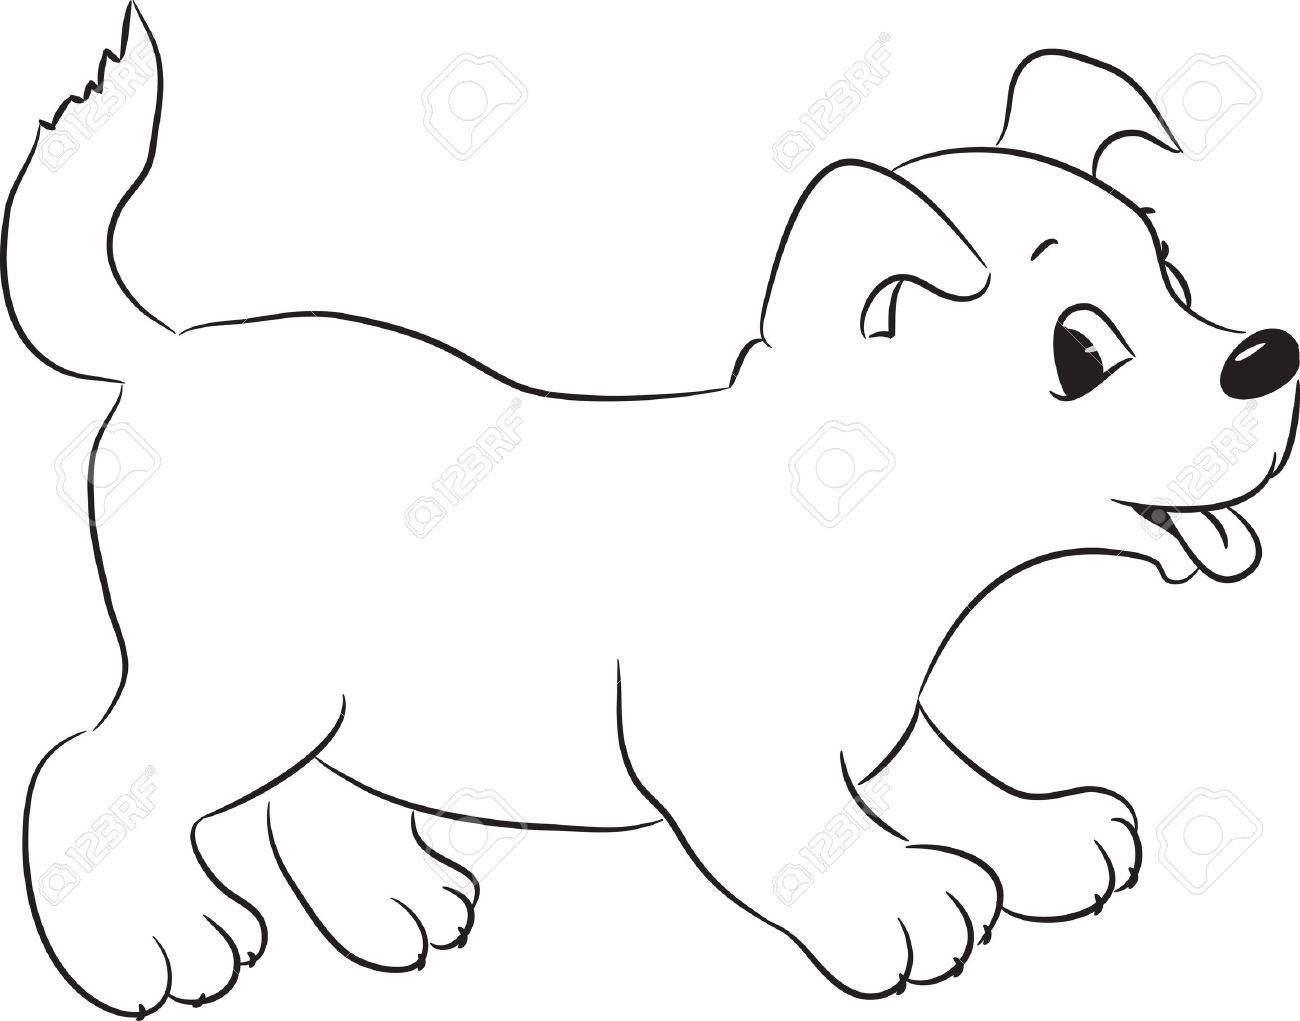 15399142-Outlined-cute-cartoon-dog-Vector-illustration--Stock-Vector-white